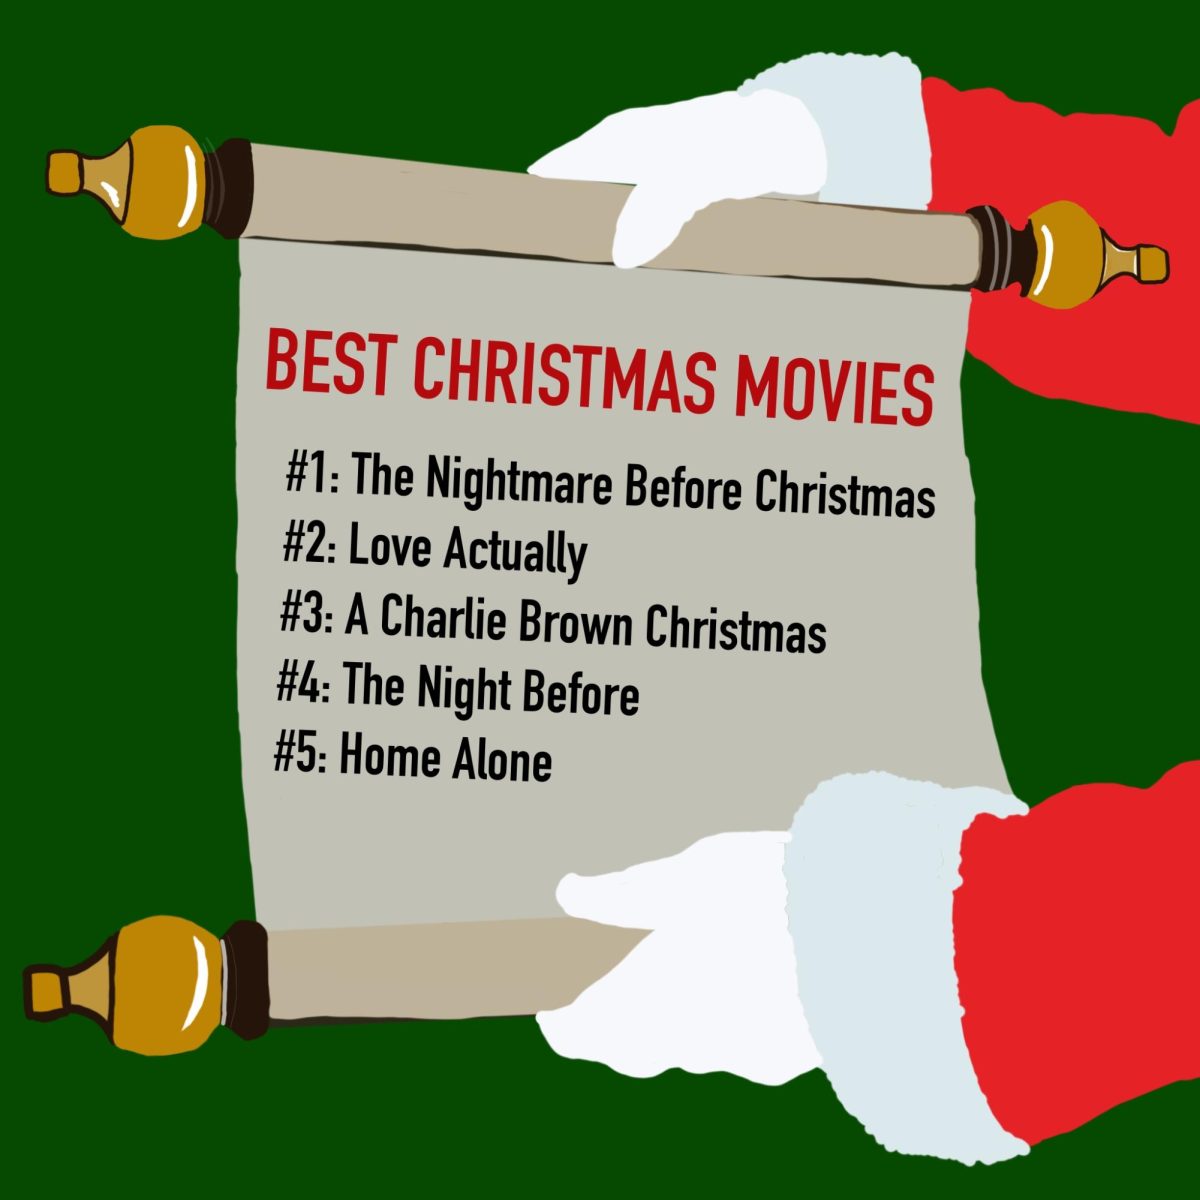 Best holiday films to get in the Christmas spirit